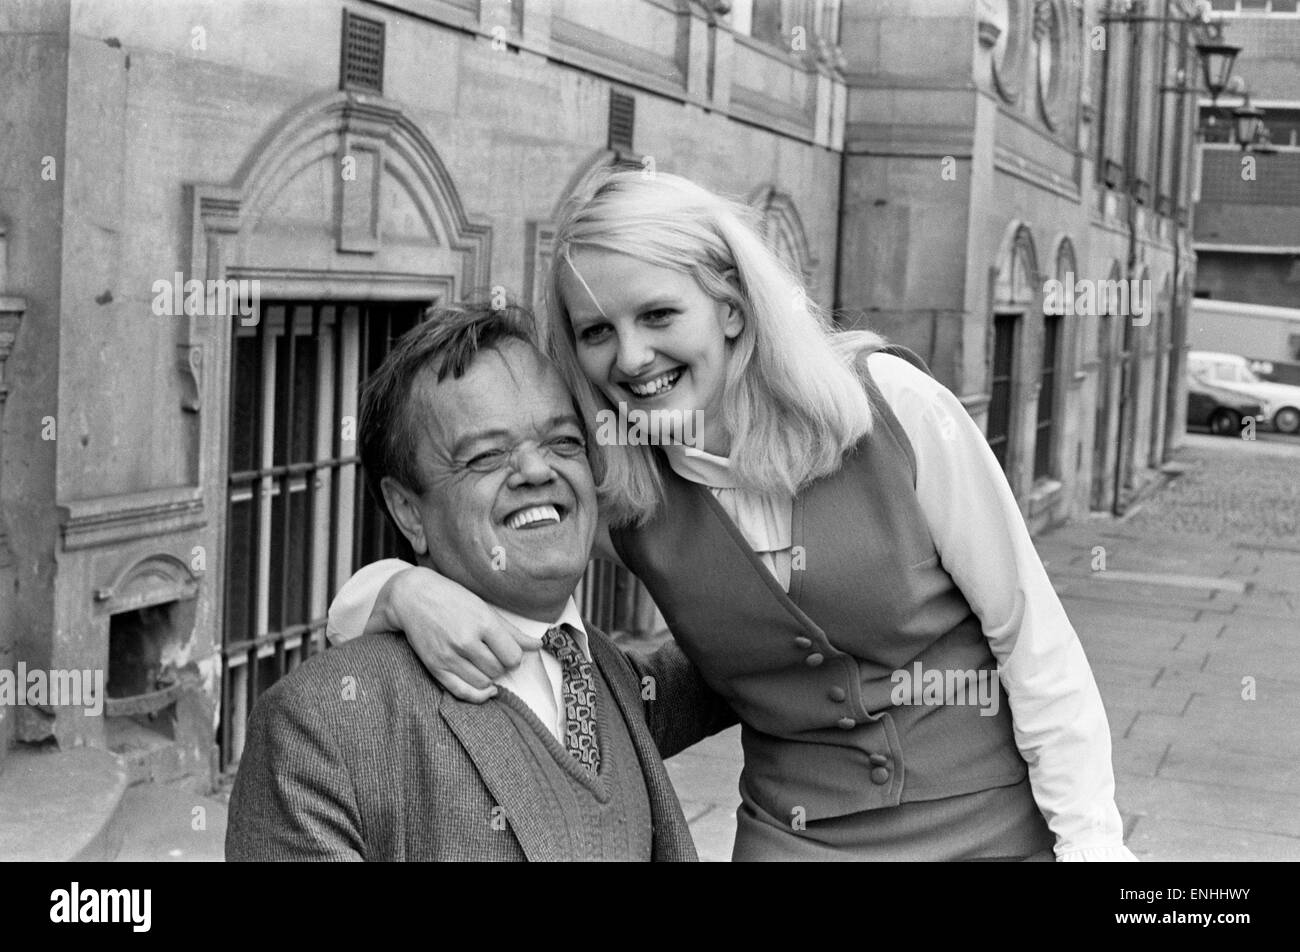 Tom Reynolds 52 & girlfriend Susan Morley 19, pictured together outside Leicestershire Assizes Court, 18th November 1970. Stock Photo